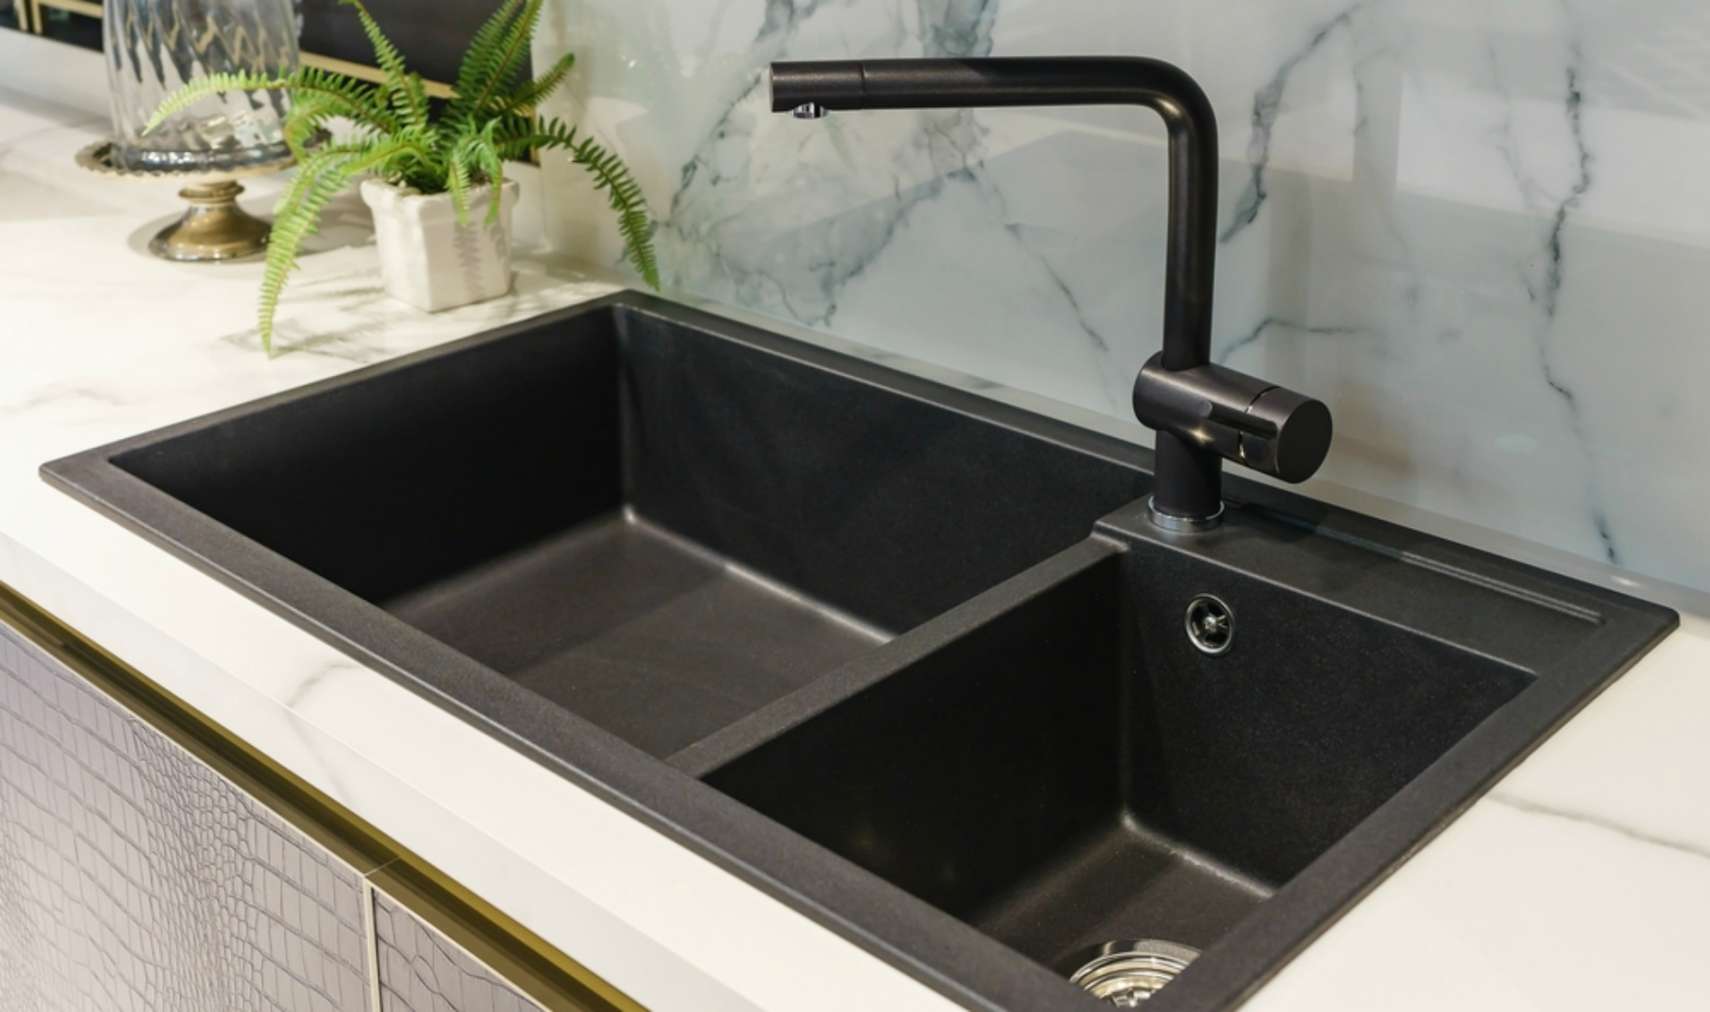 What You Need to Know When Buying a Black Kitchen Sink